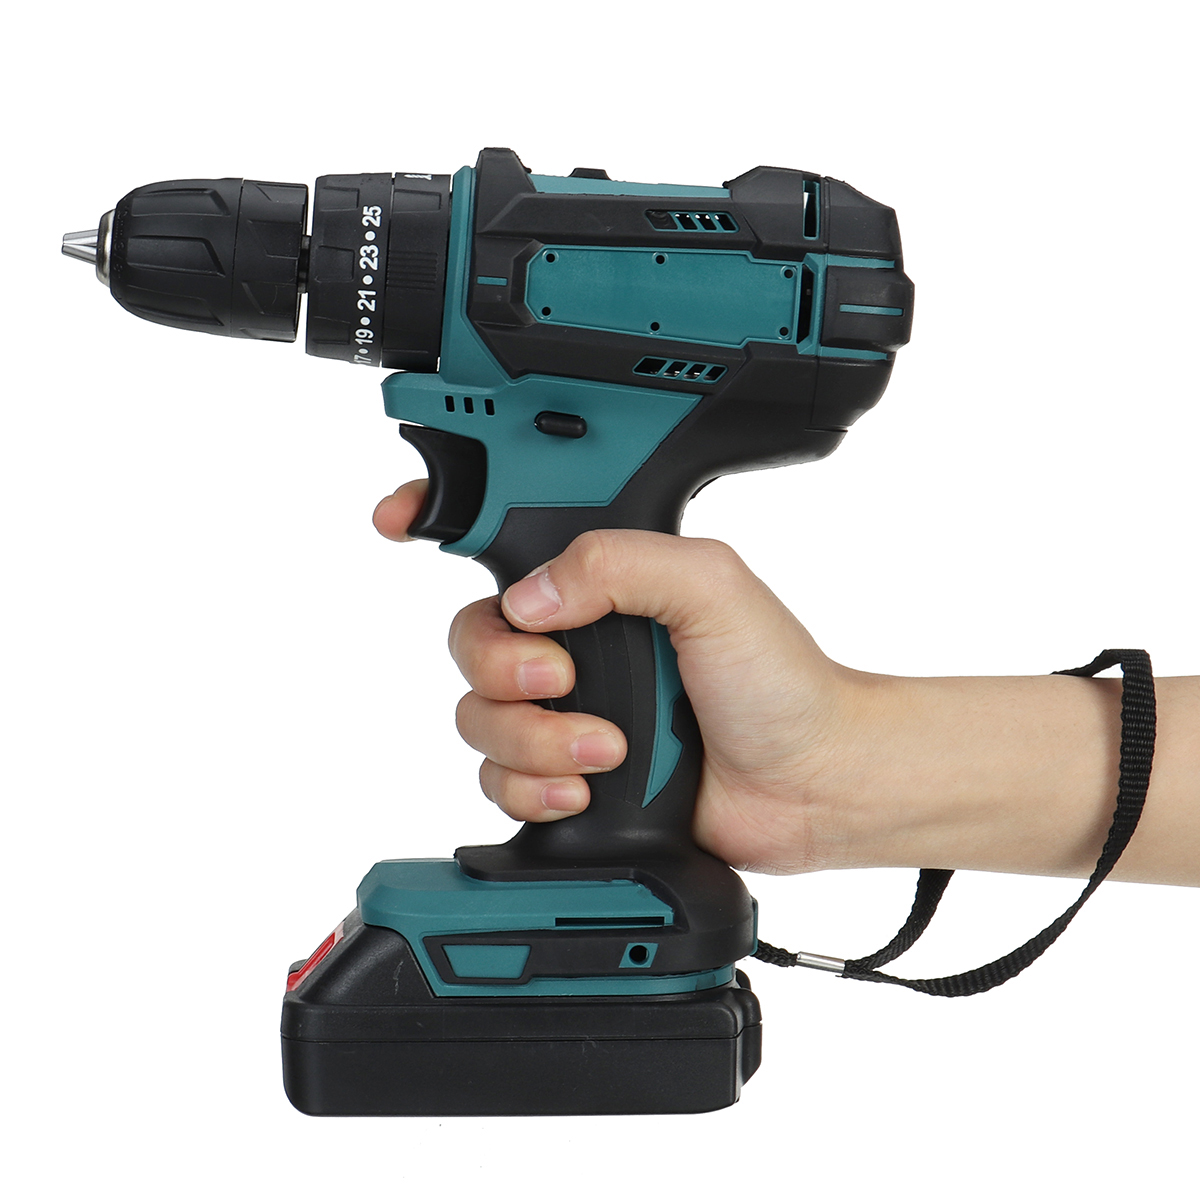 18V-Electric-Drill-Rechargeable-Screwdriver-Flat-Drill-Impact-Wrench-w-None-or-1pc-or-2pcs-Battery-1798111-9